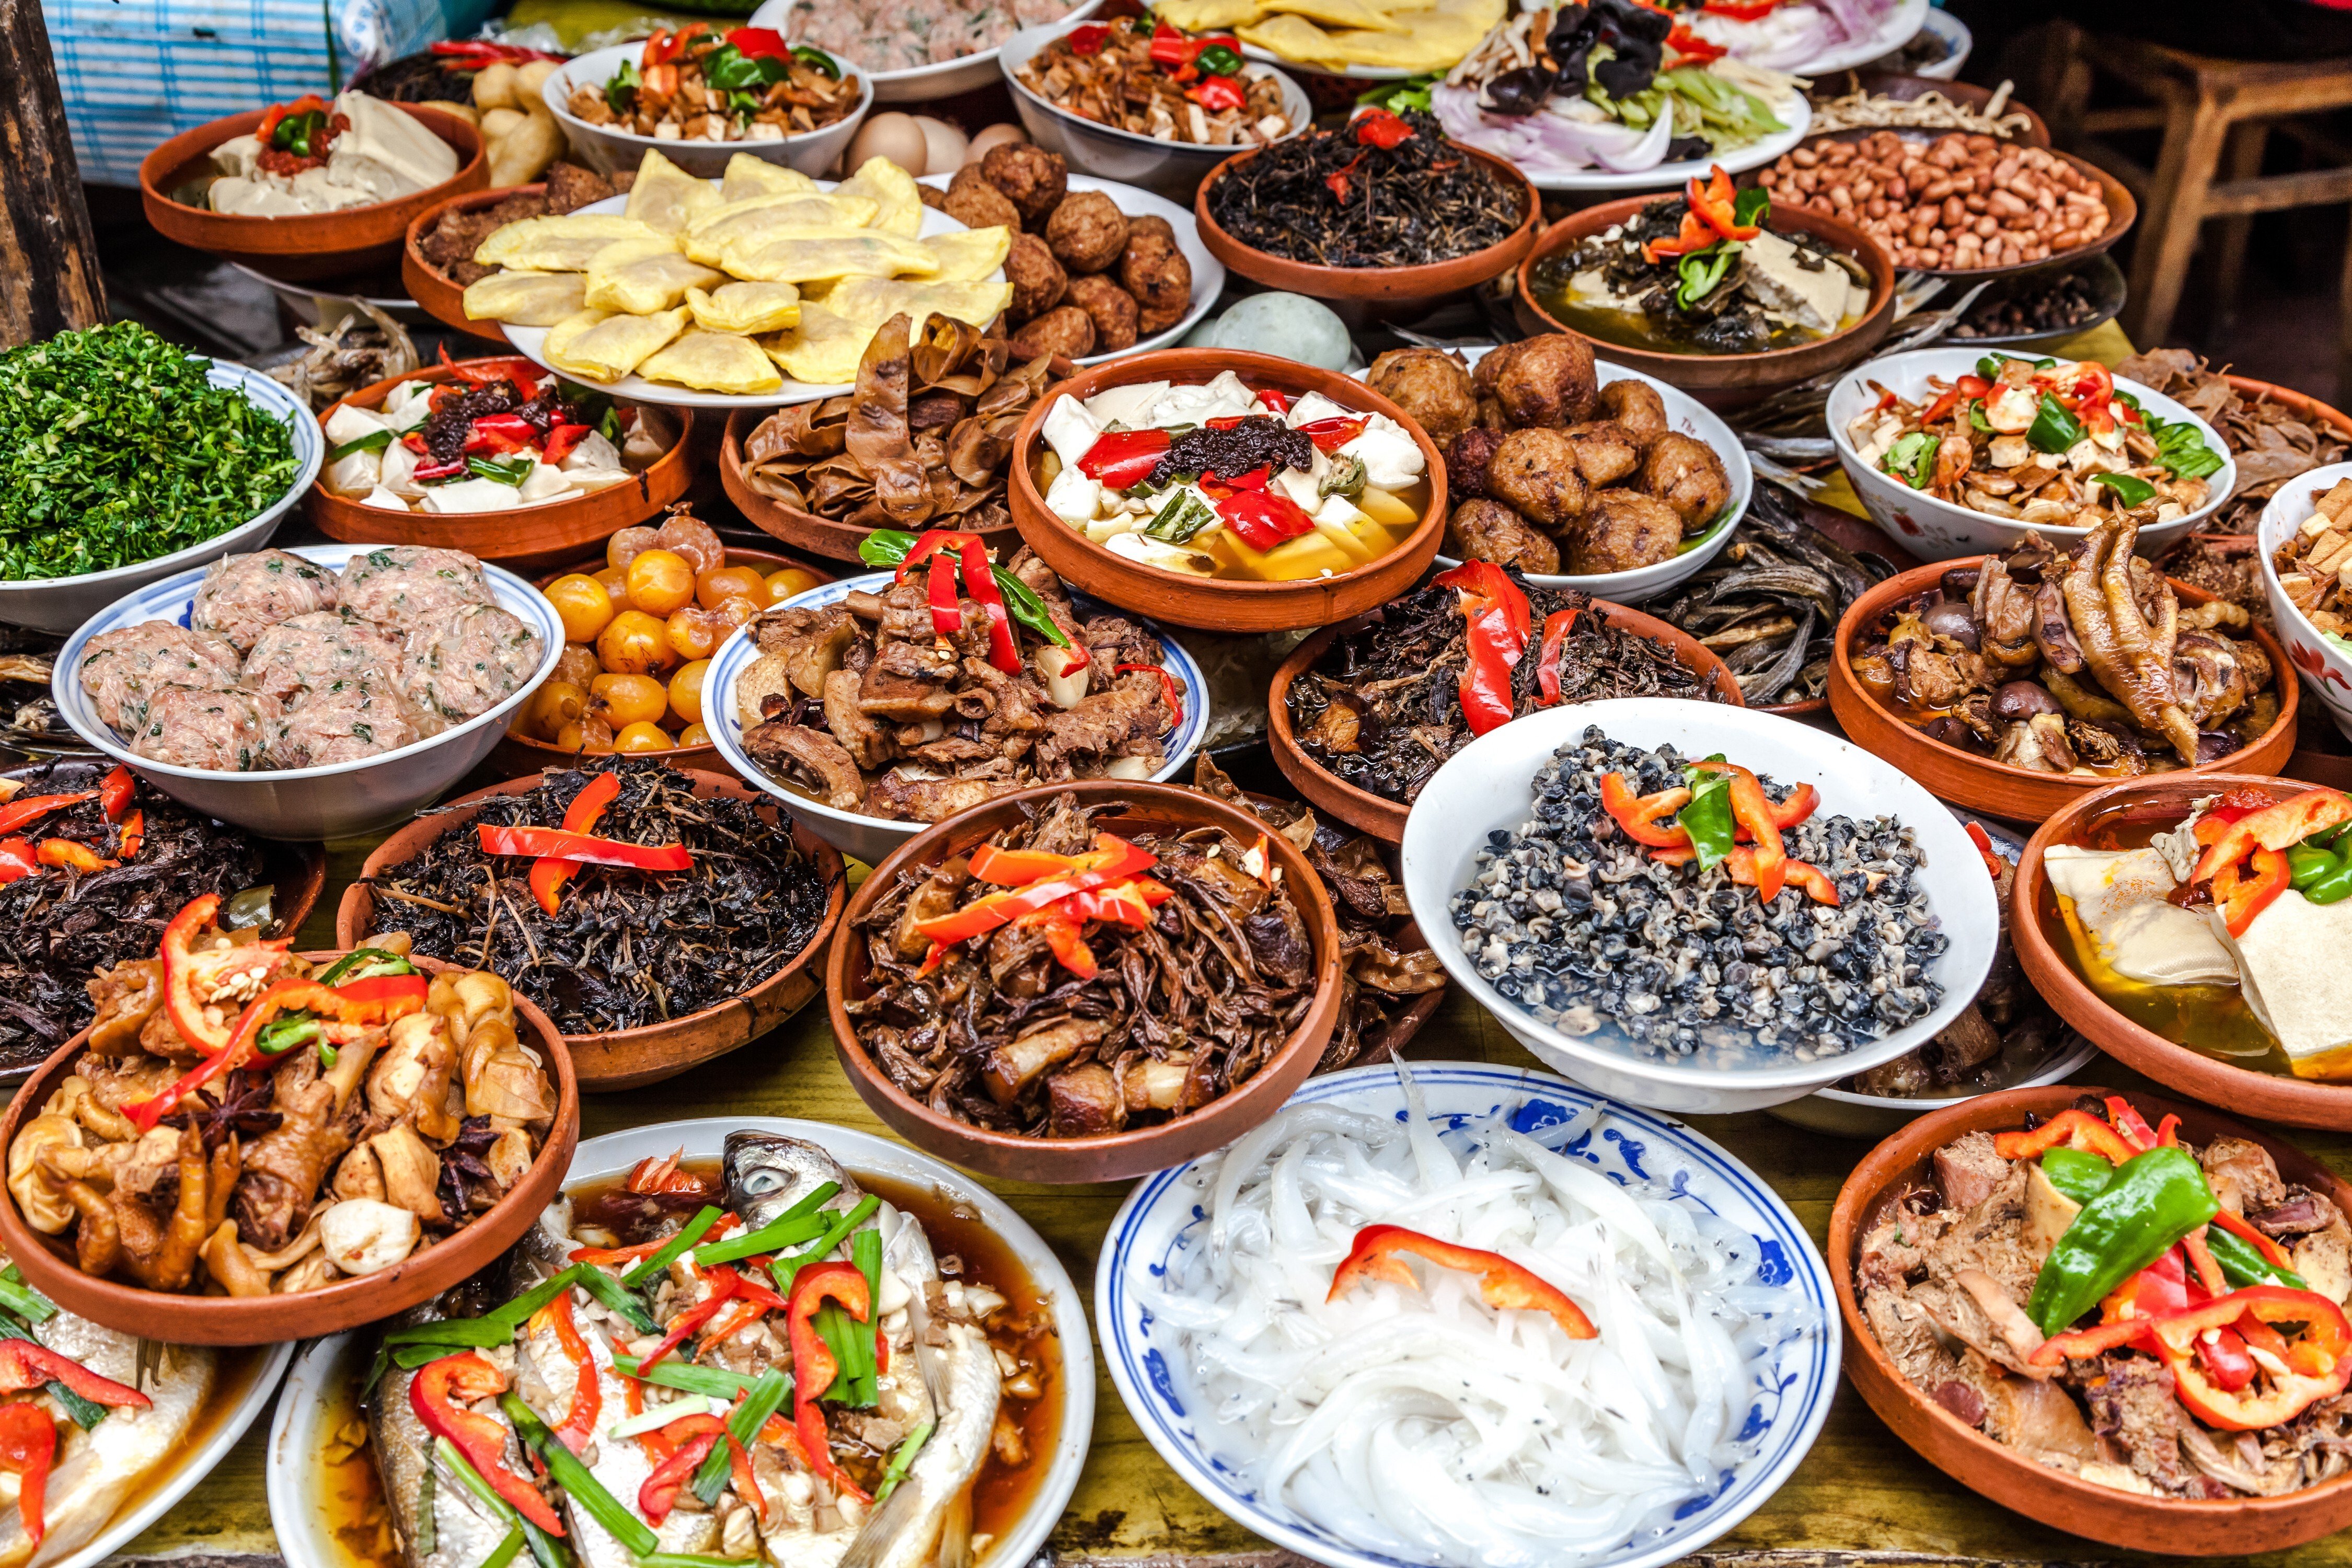 An abundance of food is regarded as a symbol of hospitality and social standing in China. Photo: Shutterstock